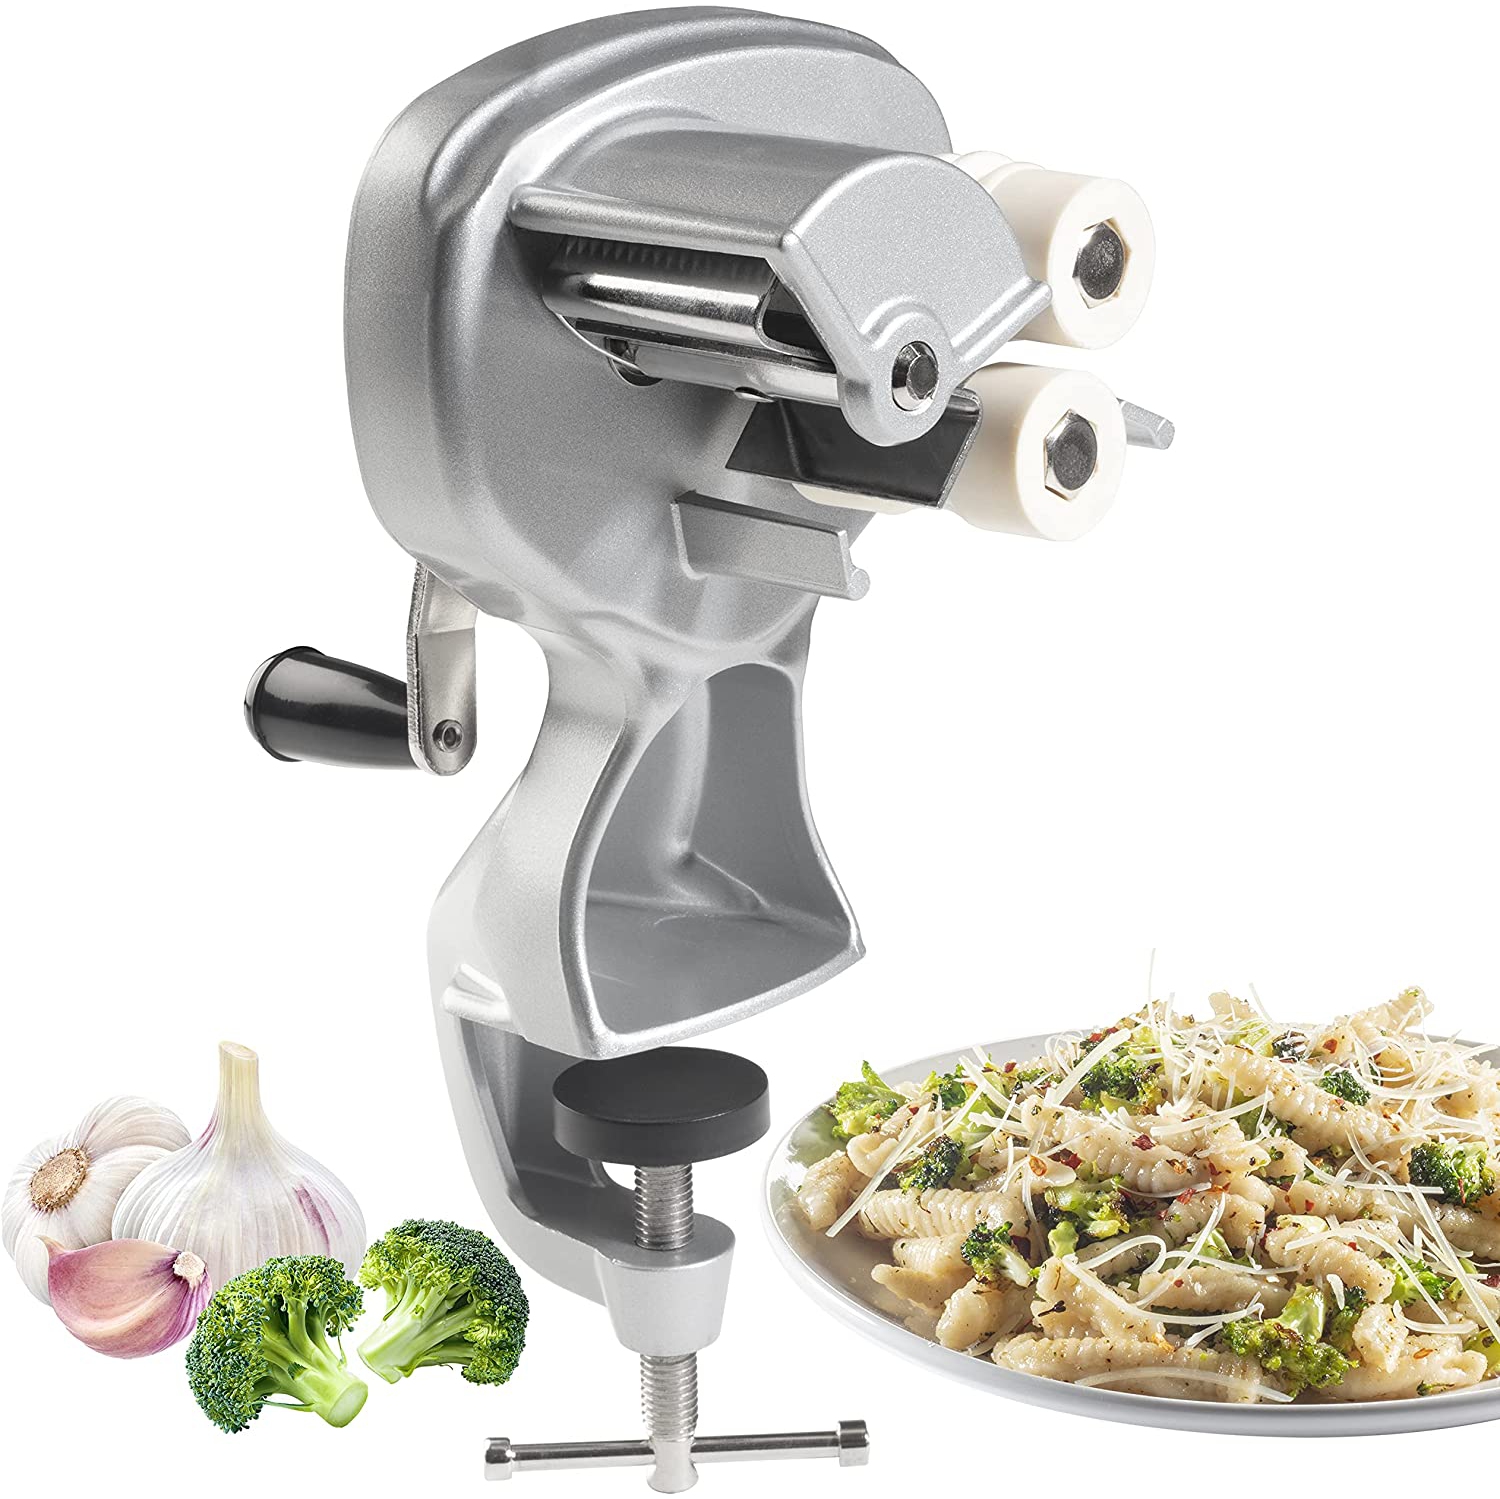 Cavatelli Maker Machine w Easy to Clean Rollers - Makes Authentic Gnocchi, Pasta Seashells and More - Recipes Included,